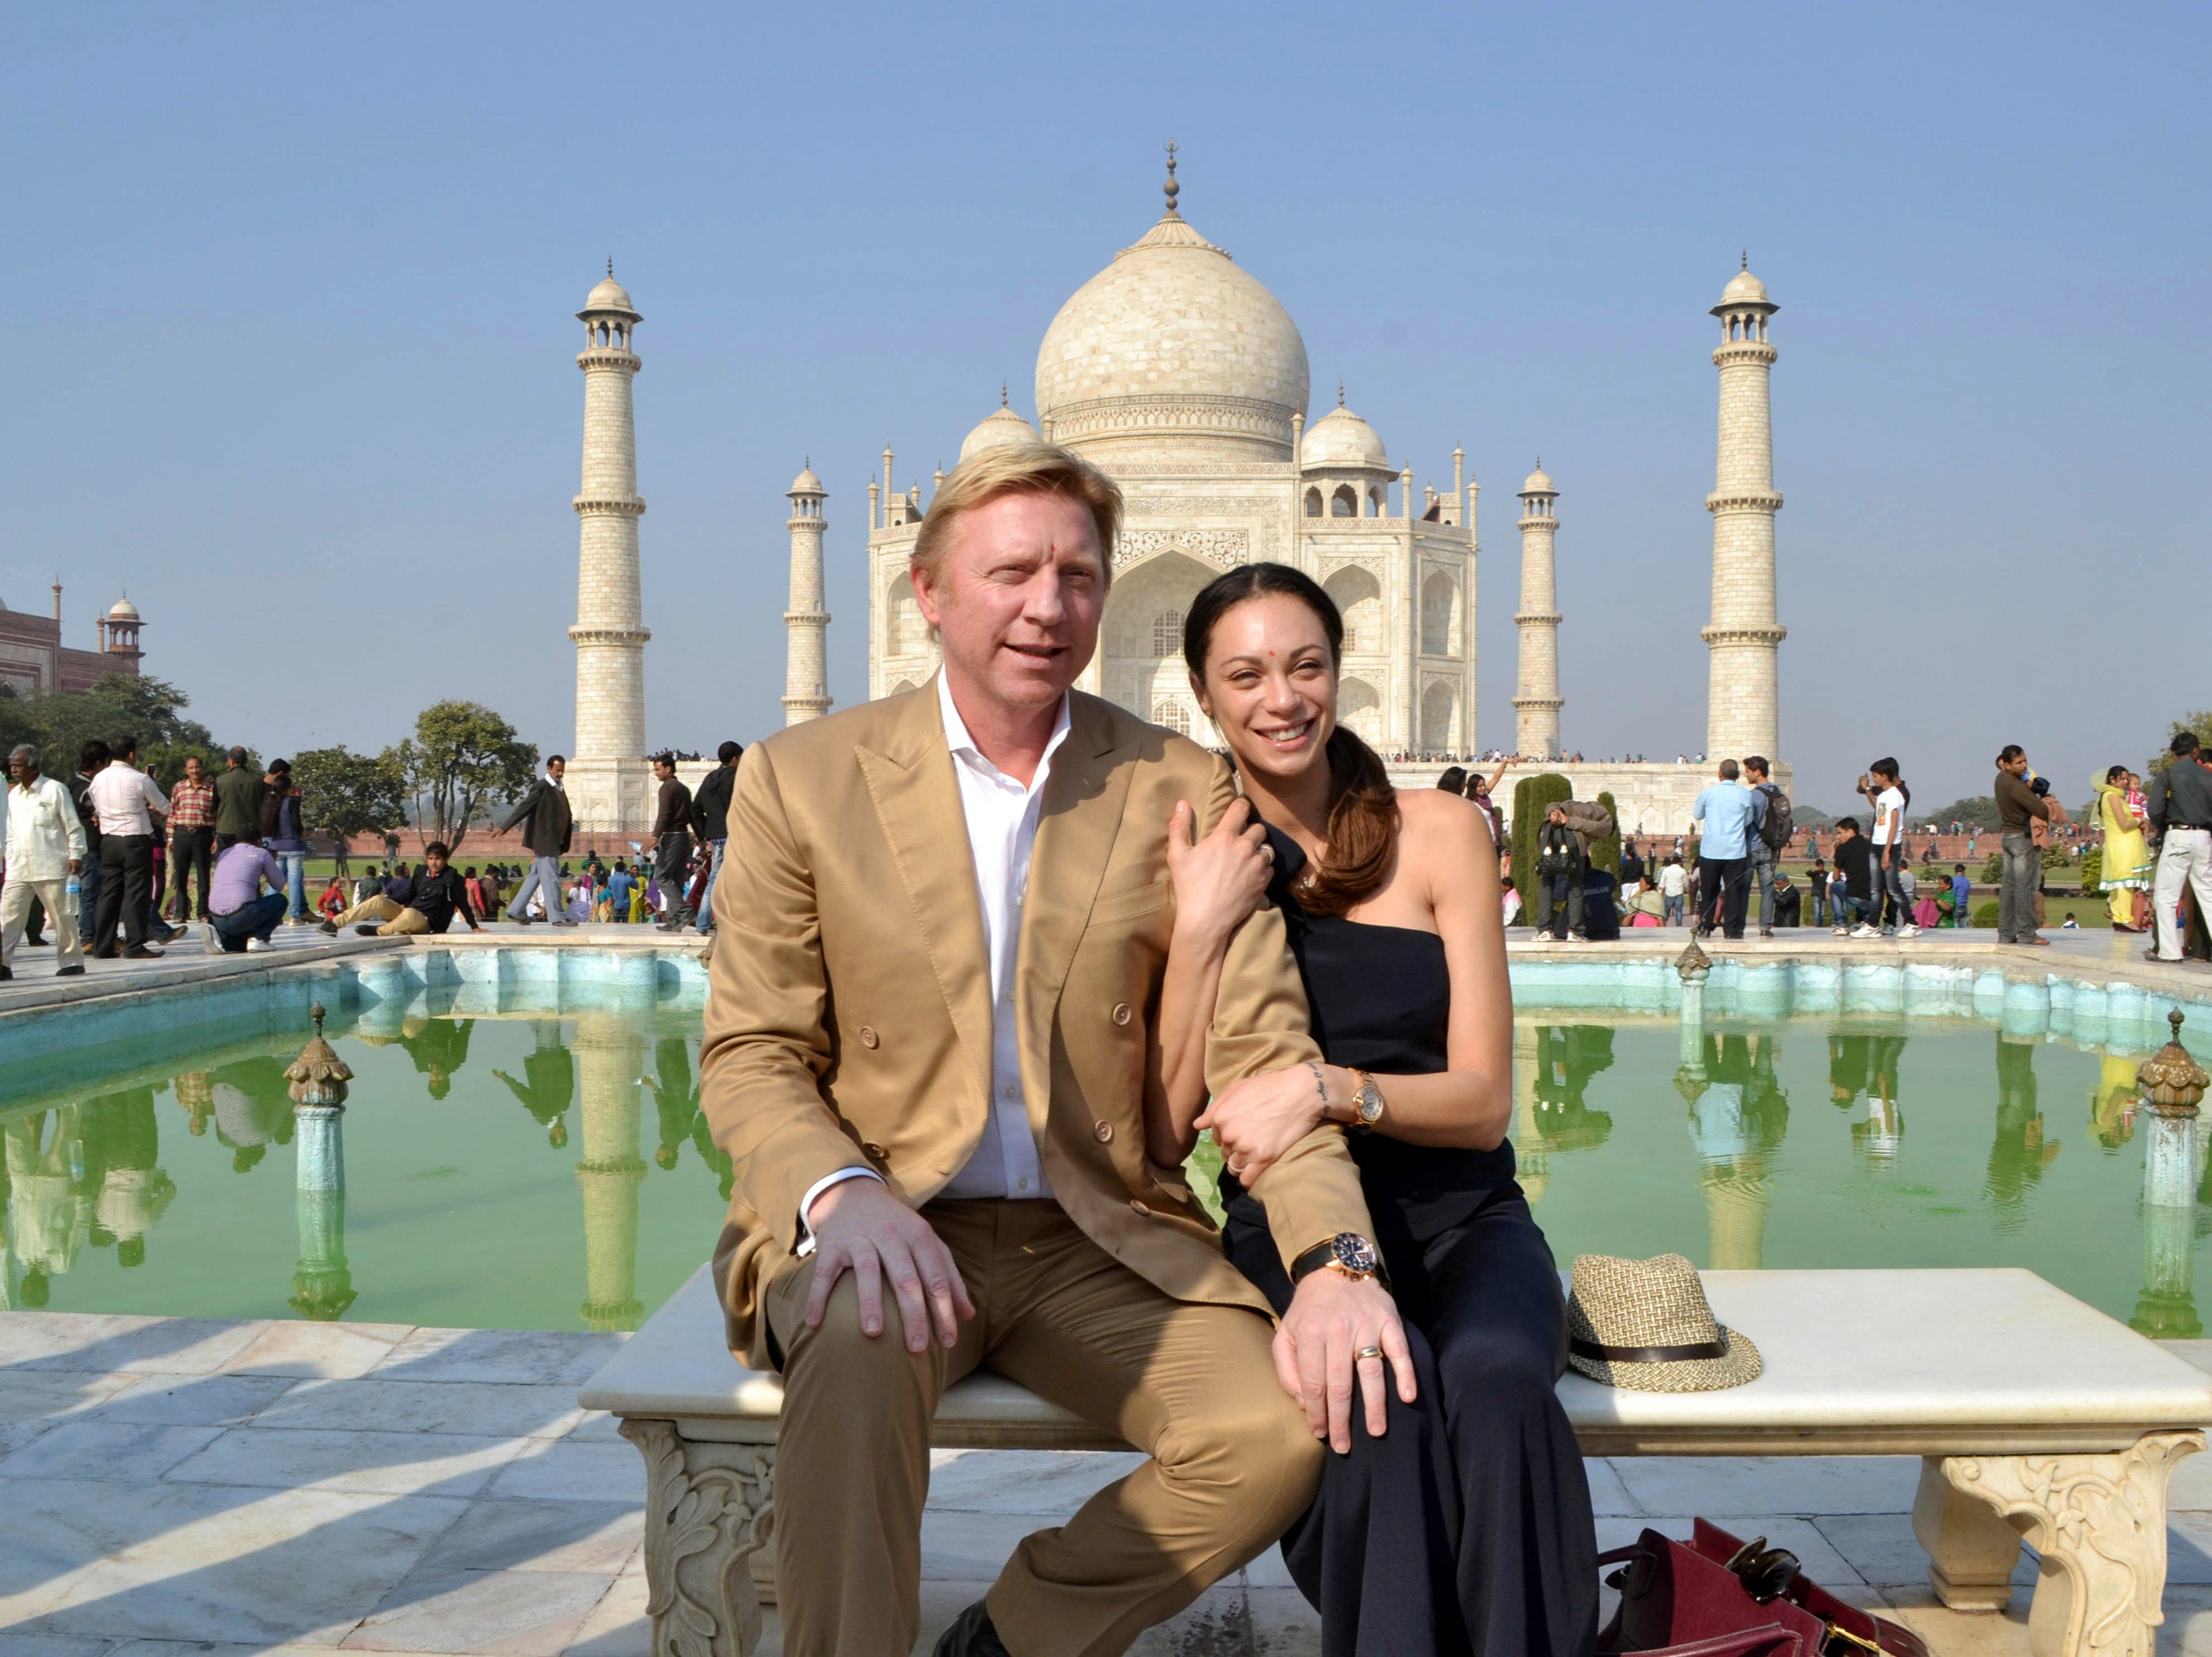 Former tennis star Boris Becker and his wife Lily pose for a photograph in front of the Taj Mahal in 2012